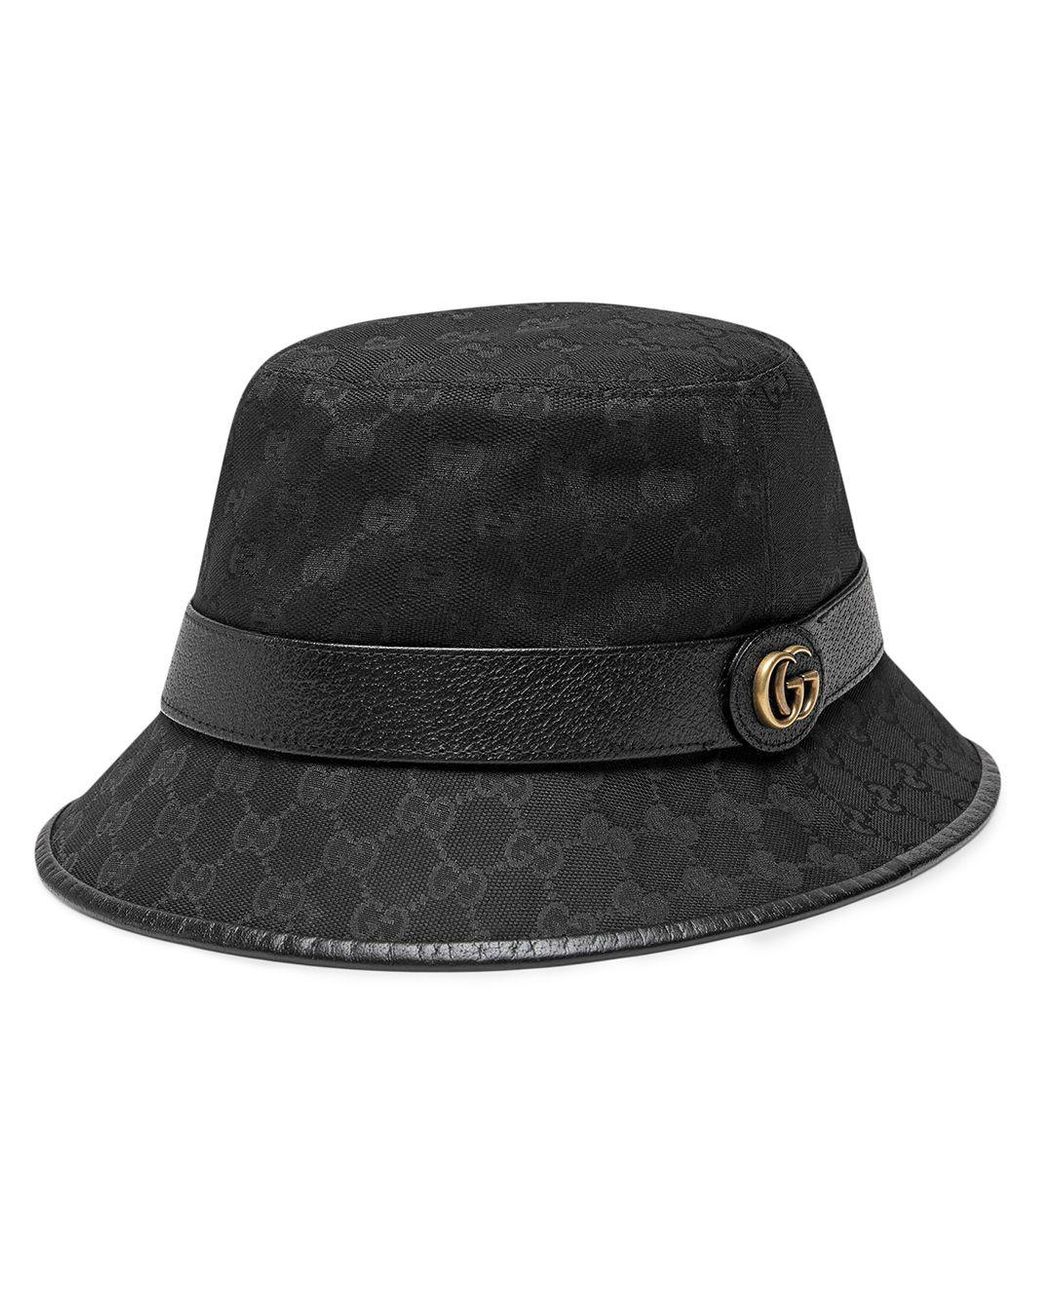 Gucci Mar Bucket Hat in for Men - Save 36% - Lyst